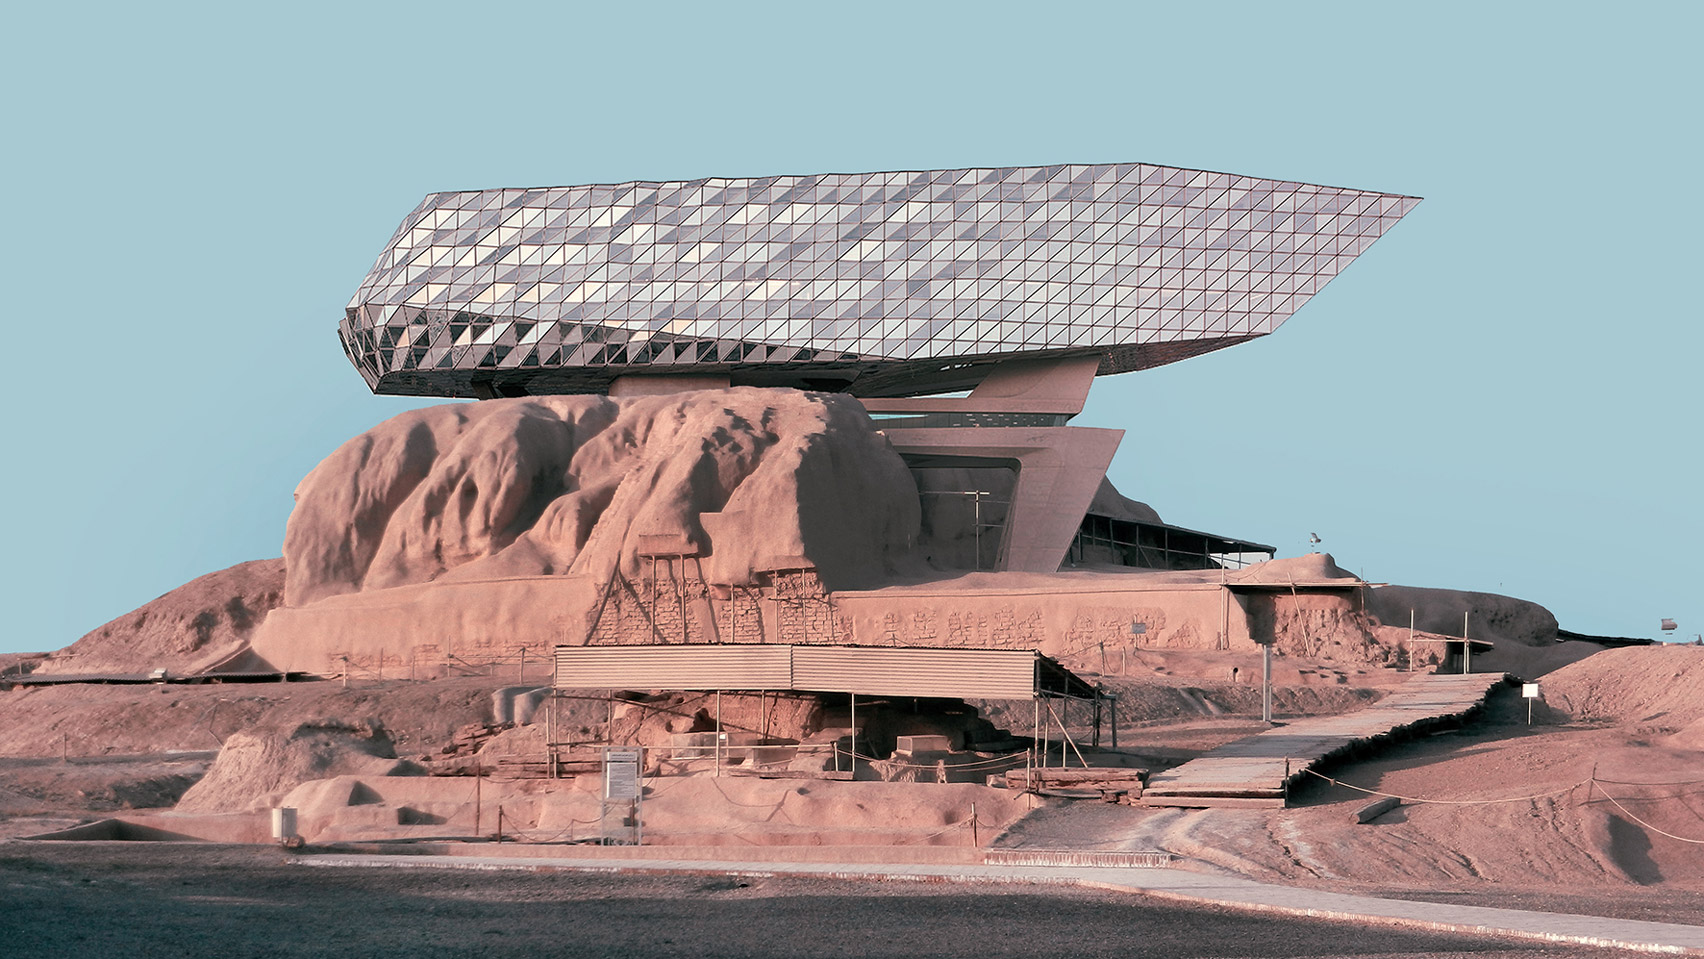 And finally... Architect superimposes contemporary buildings onto ancient Iranian sites